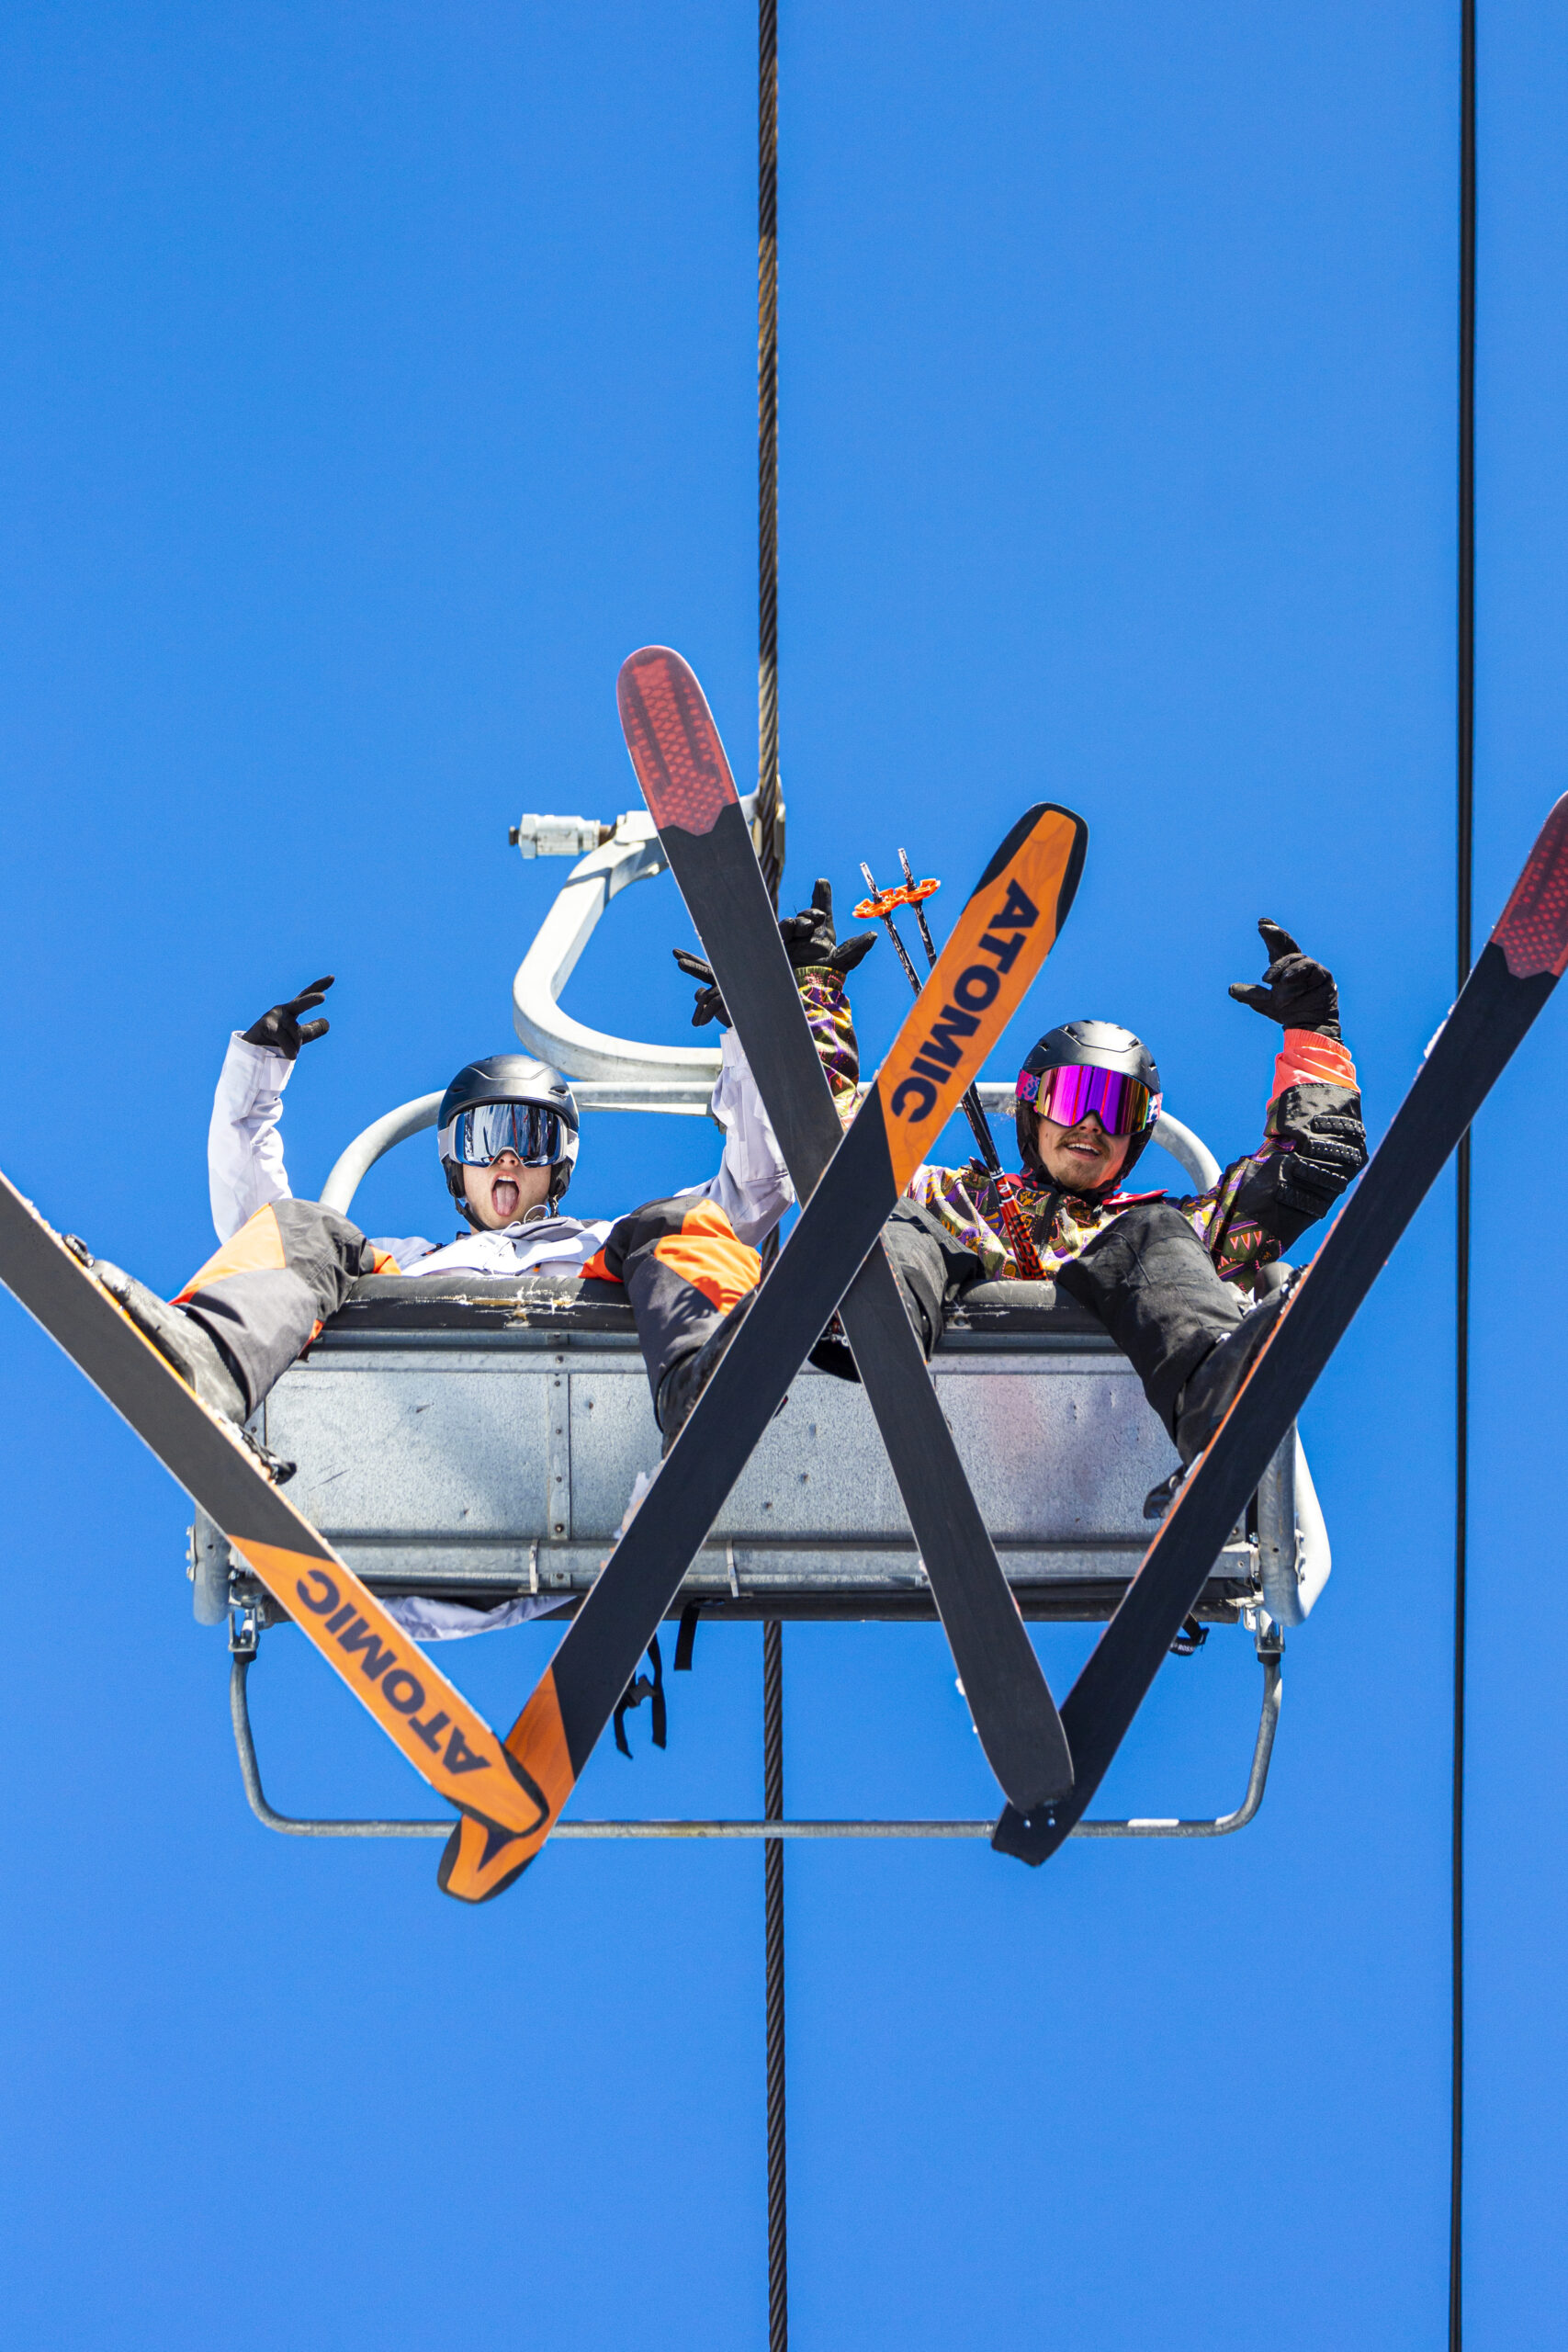 Two people posing on the ski lift with a blue sky above them.